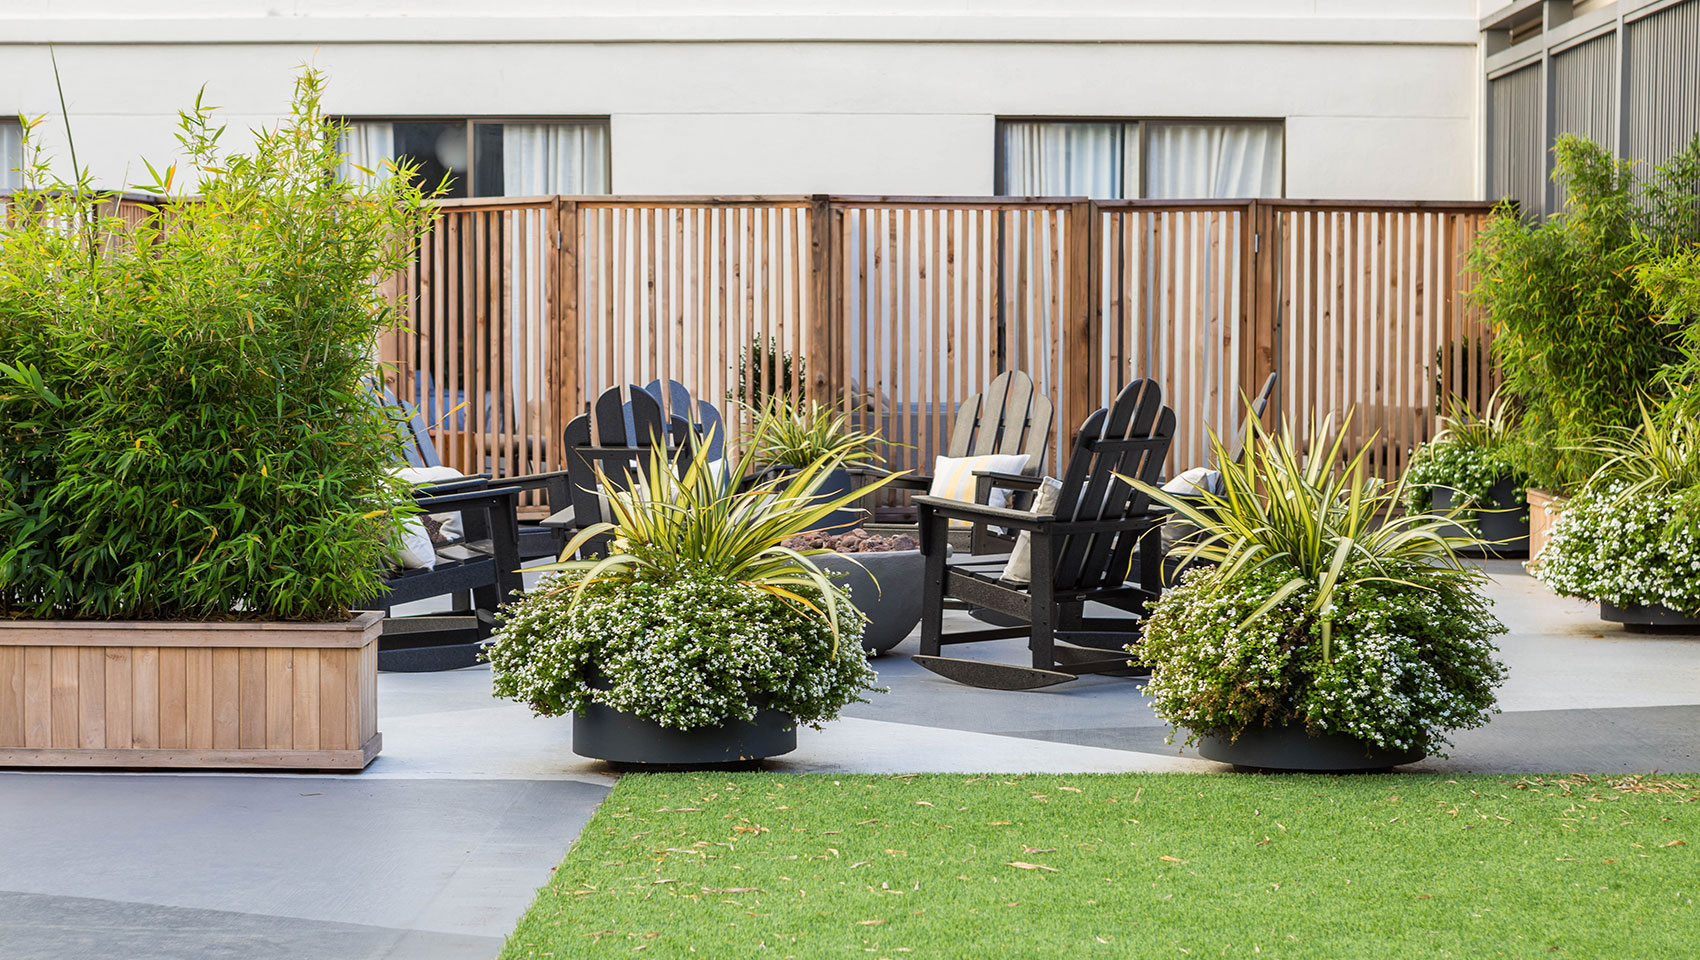 enso courtyard with chairs and lawn